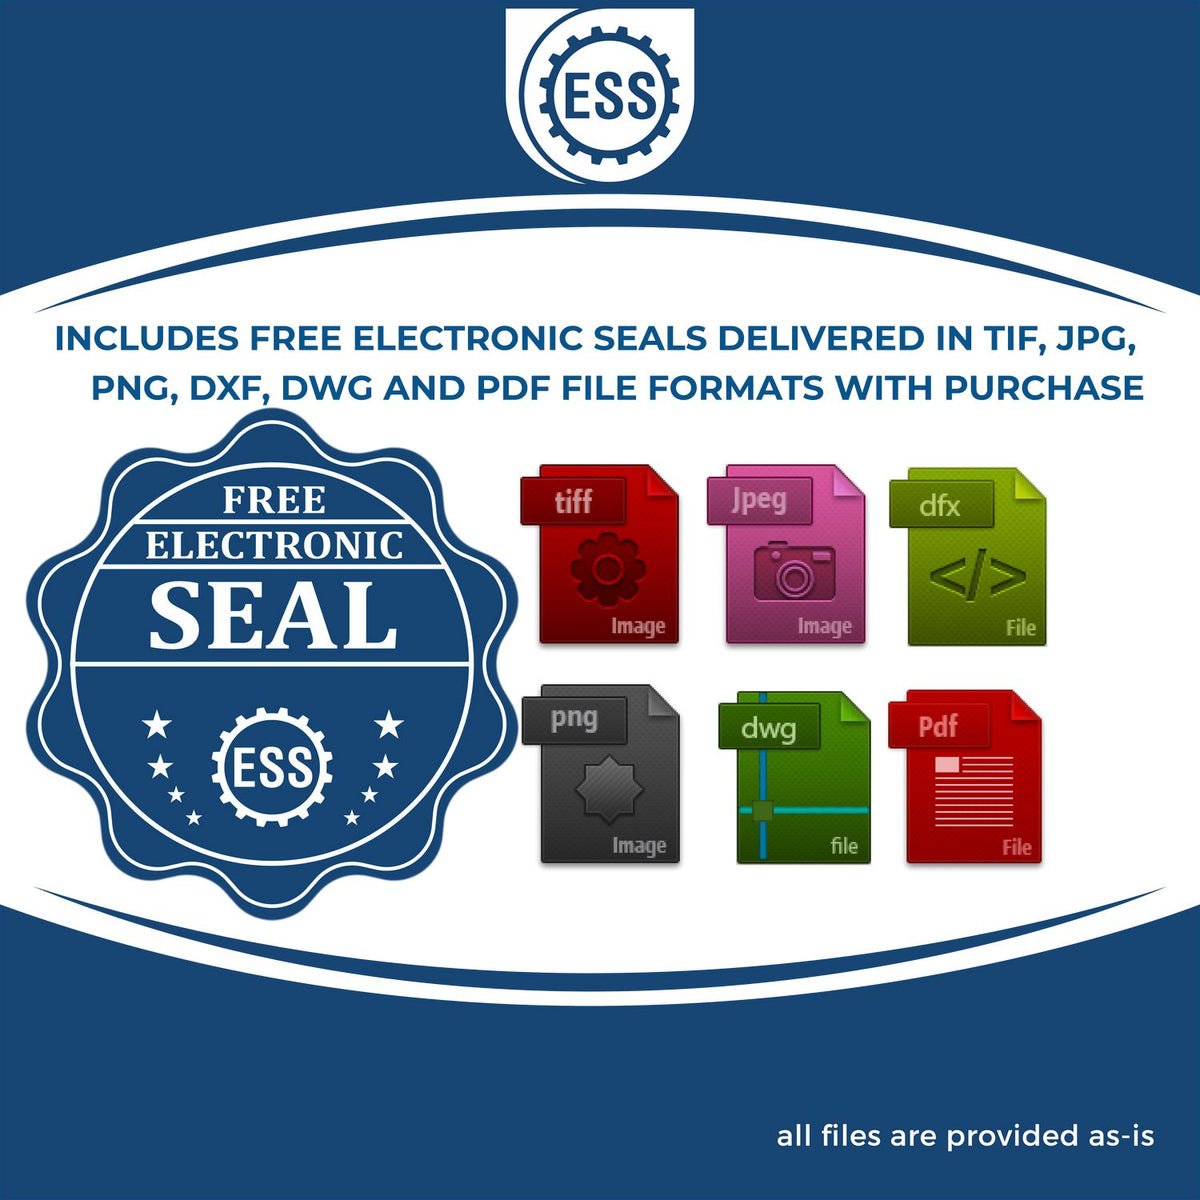 An infographic for the free electronic seal for the Gift Arizona Architect Seal illustrating the different file type icons such as DXF, DWG, TIF, JPG and PNG.